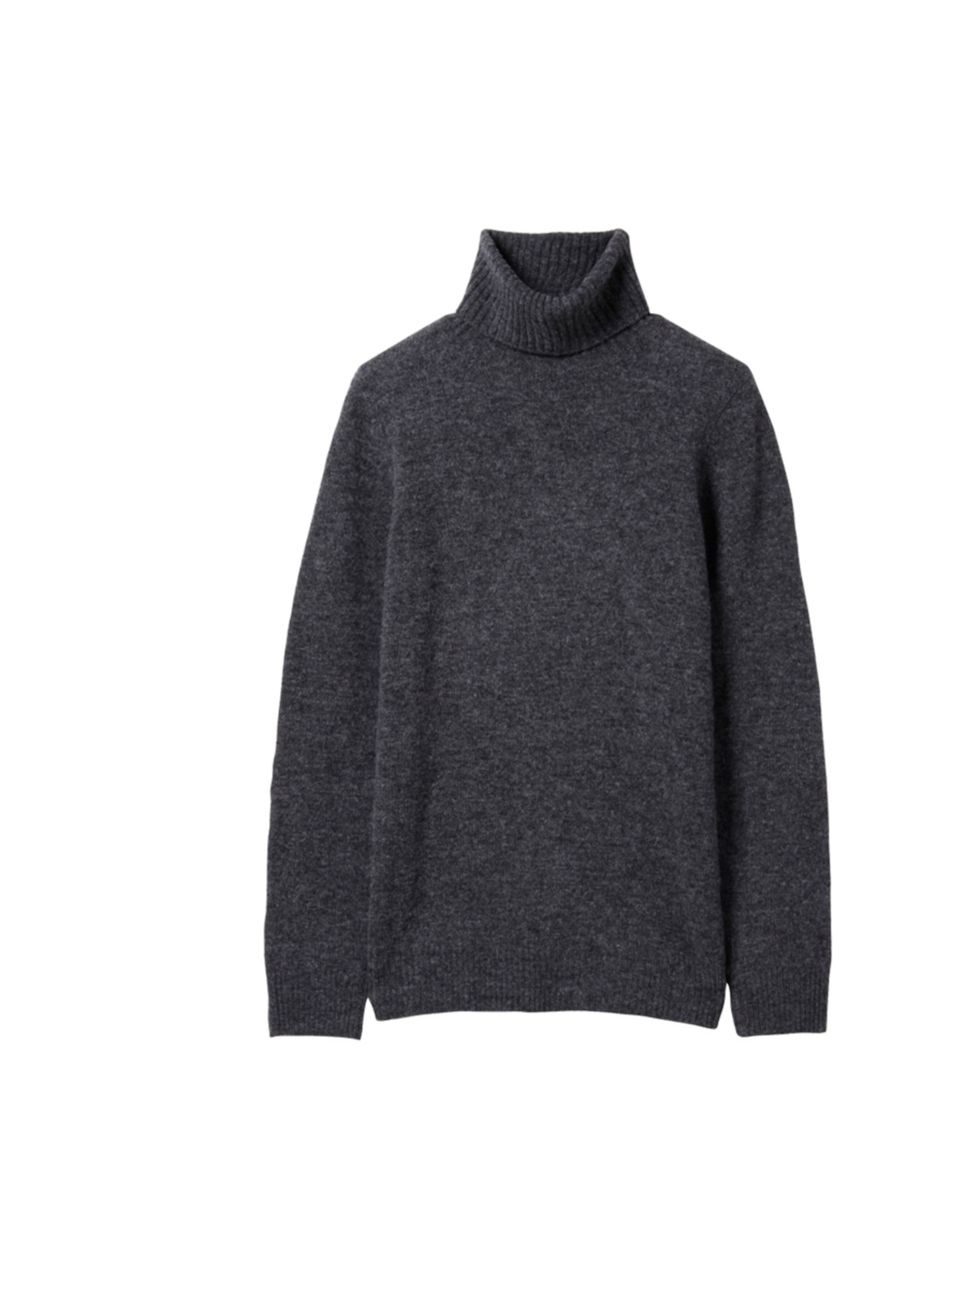 <p>Uniqlo dark grey lambswool polo neck jumper, £14.90</p><p><a href="http://shopping.elleuk.com/browse?fts=uniqlo+lambswool+polo+neck+dark+grey">BUY NOW</a></p>